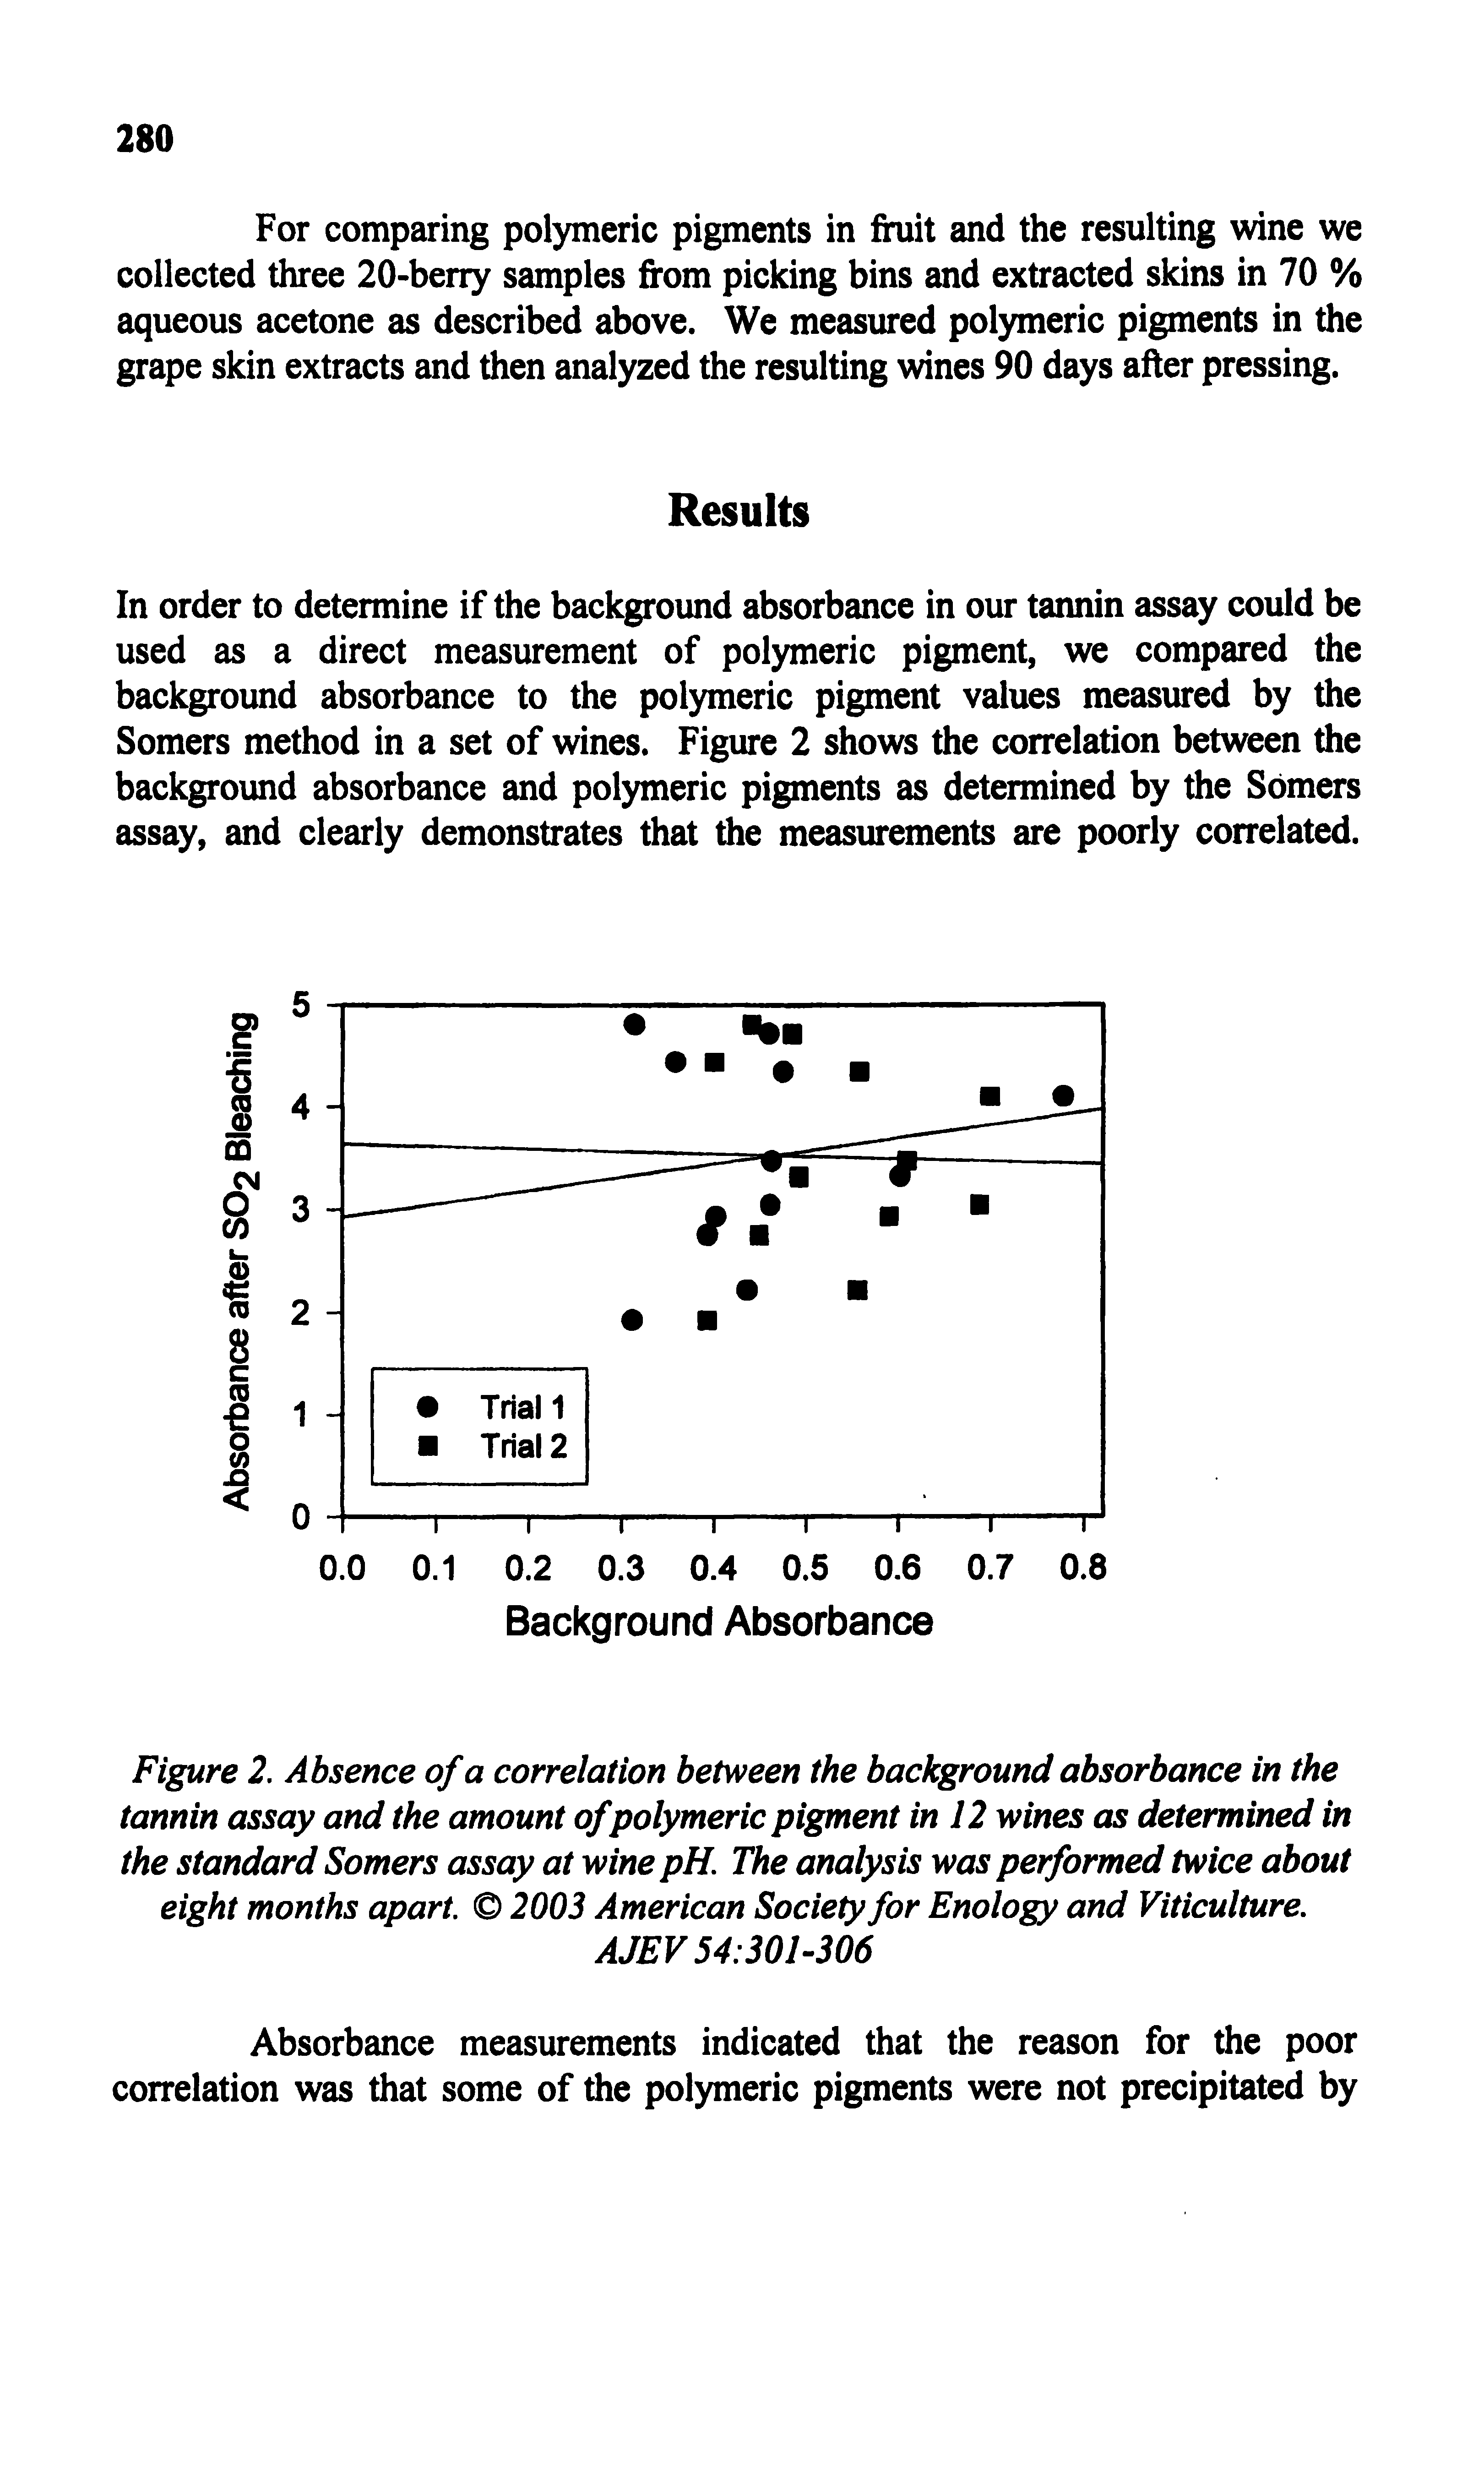 Figure 2. Absence of a correlation between the background absorbance in the tannin assay and the amount of polymeric pigment in 12 wines as determined in the standard Somers assay at wine pH. The analysis was performed twice about eight months apart. 2003 American Society for Enology and Viticulture.